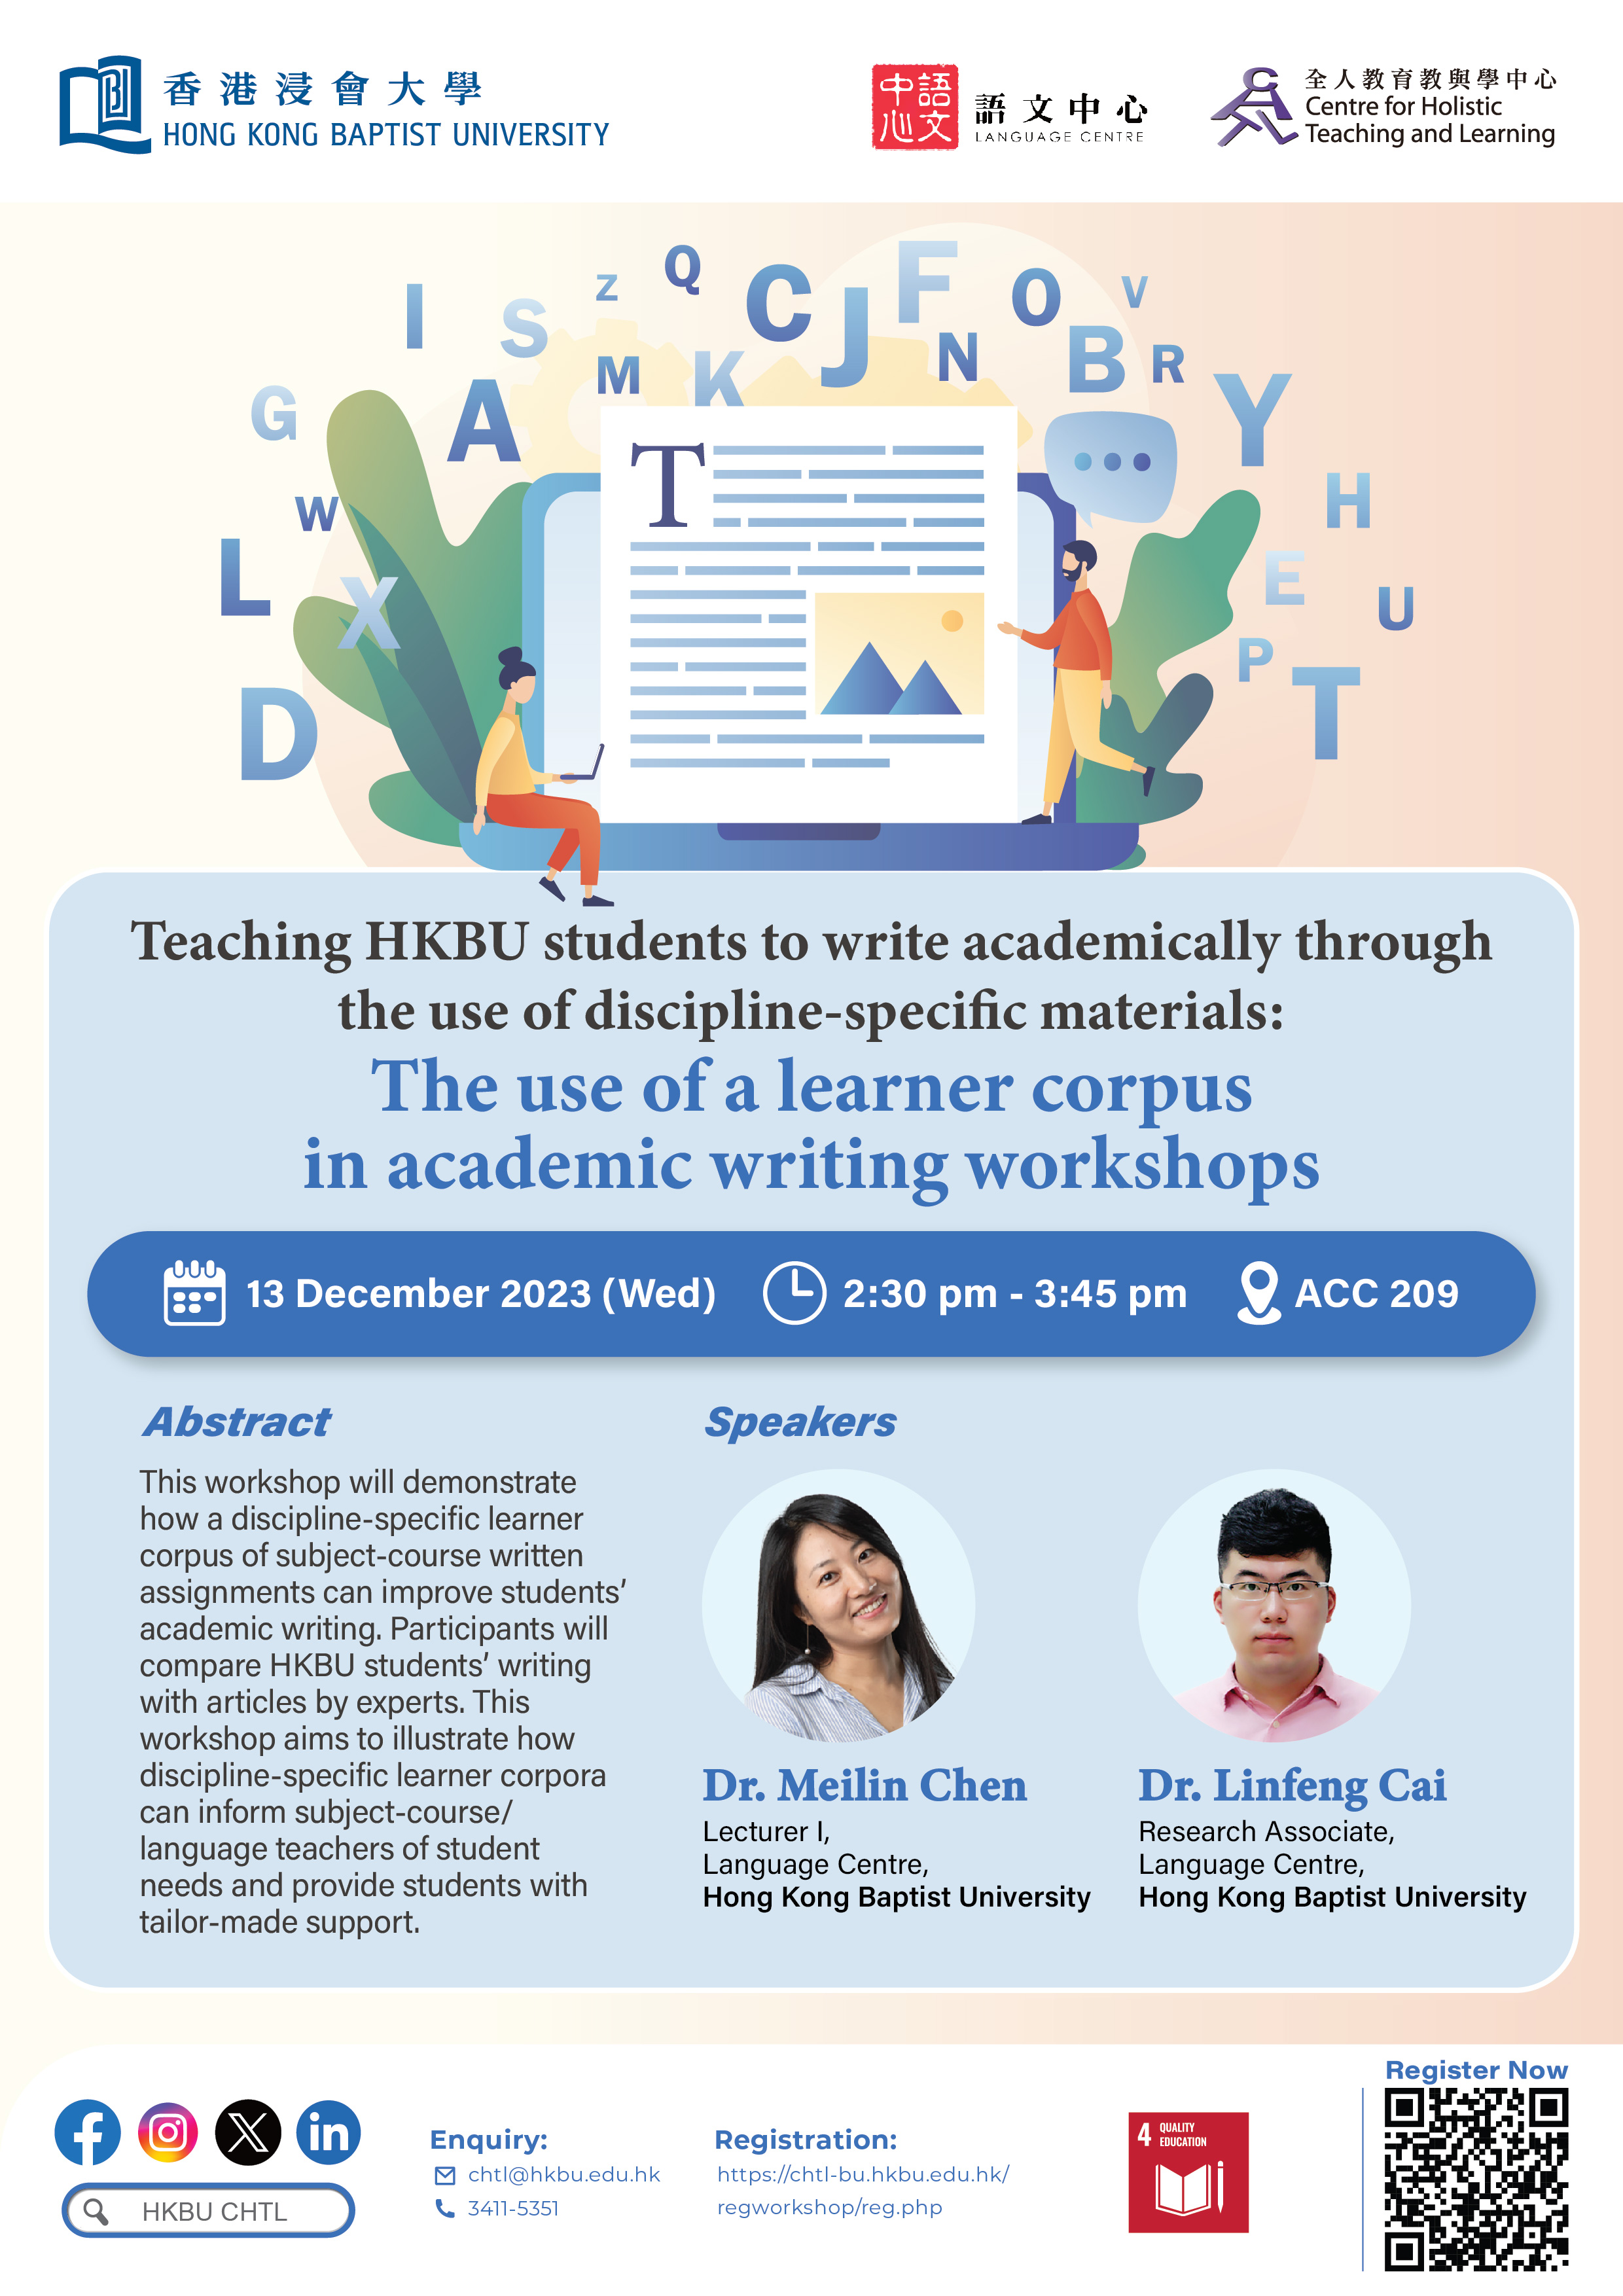 Teaching HKBU Students to Write Academically through the Use of Discipline-Specific Materials: The Use of a Learner Corpus in Academic Writing Workshops